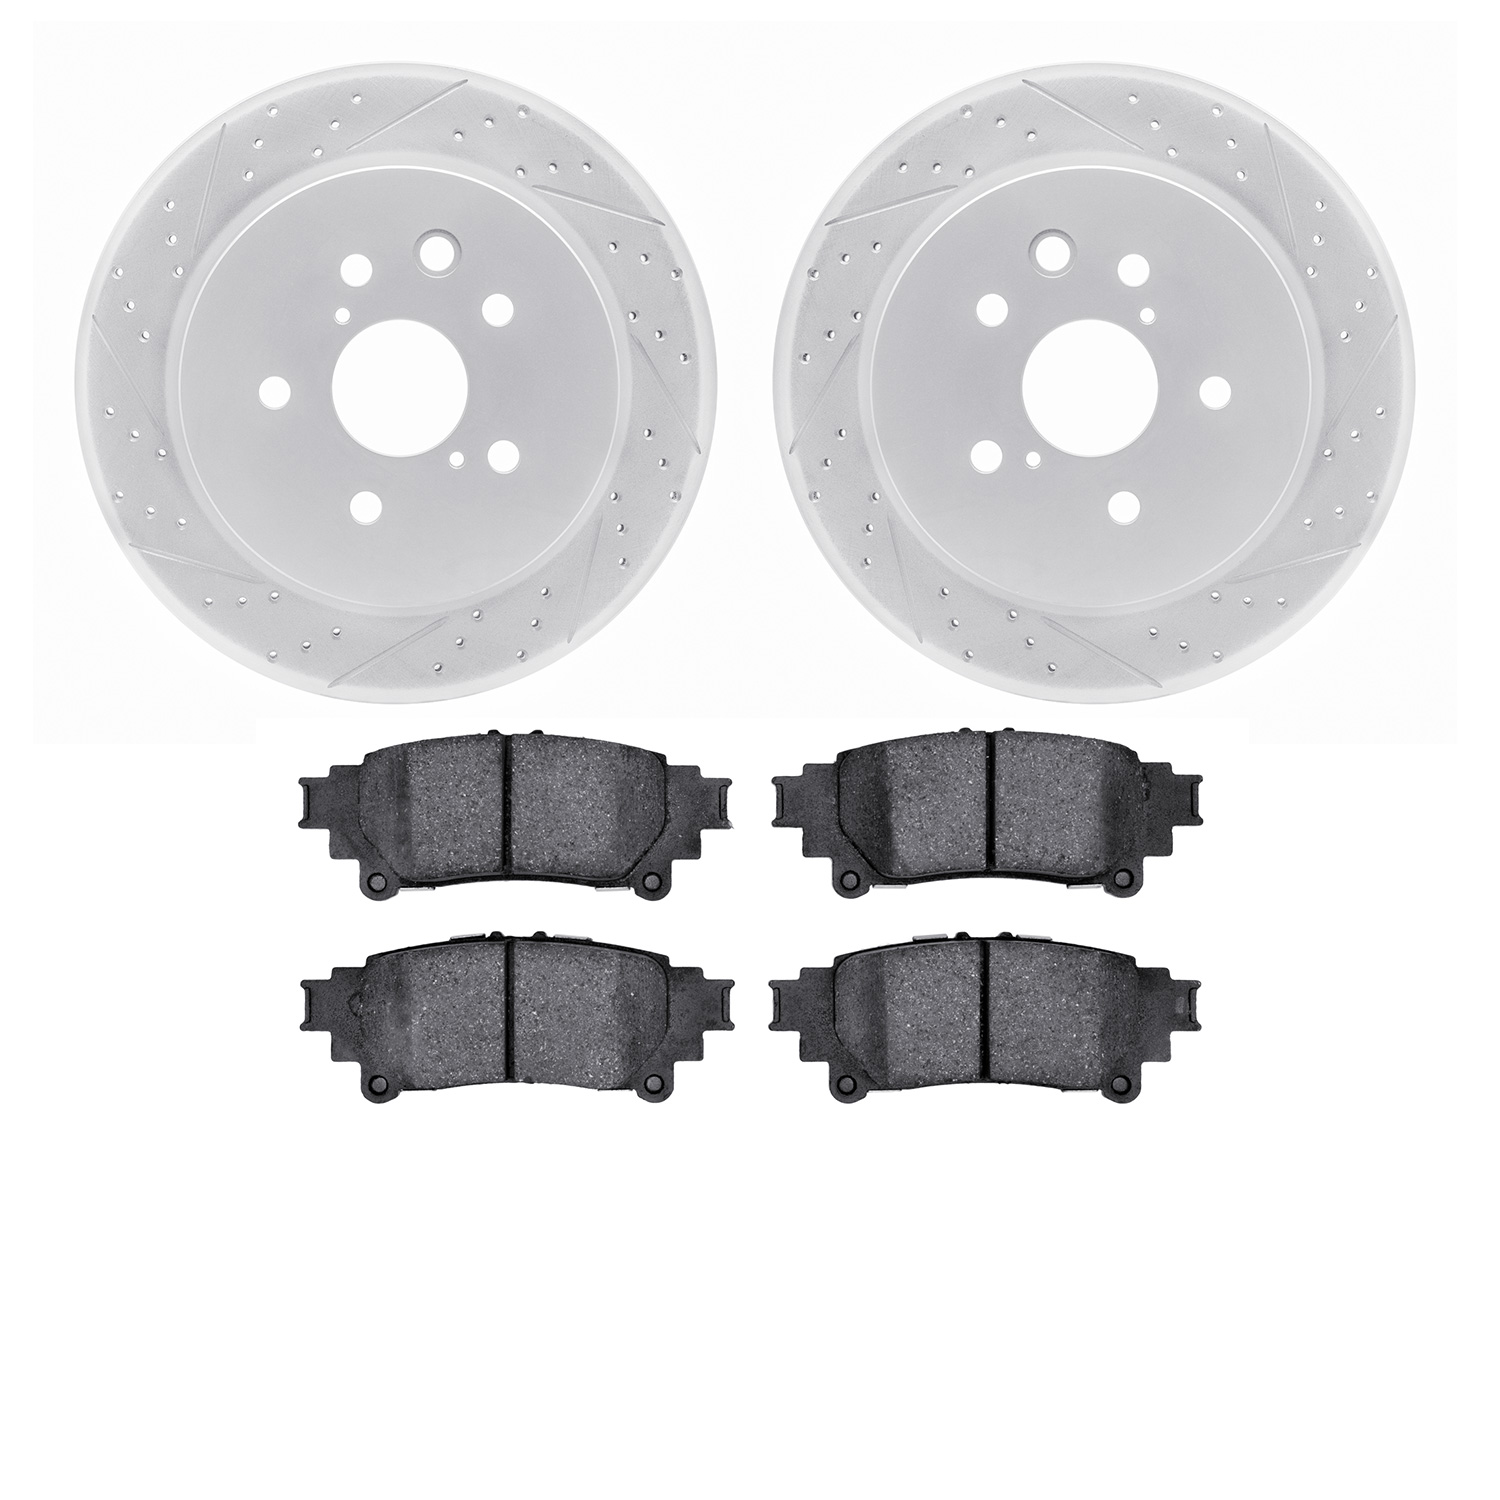 2502-75011 Geoperformance Drilled/Slotted Rotors w/5000 Advanced Brake Pads Kit, 2014-2015 Lexus/Toyota/Scion, Position: Rear